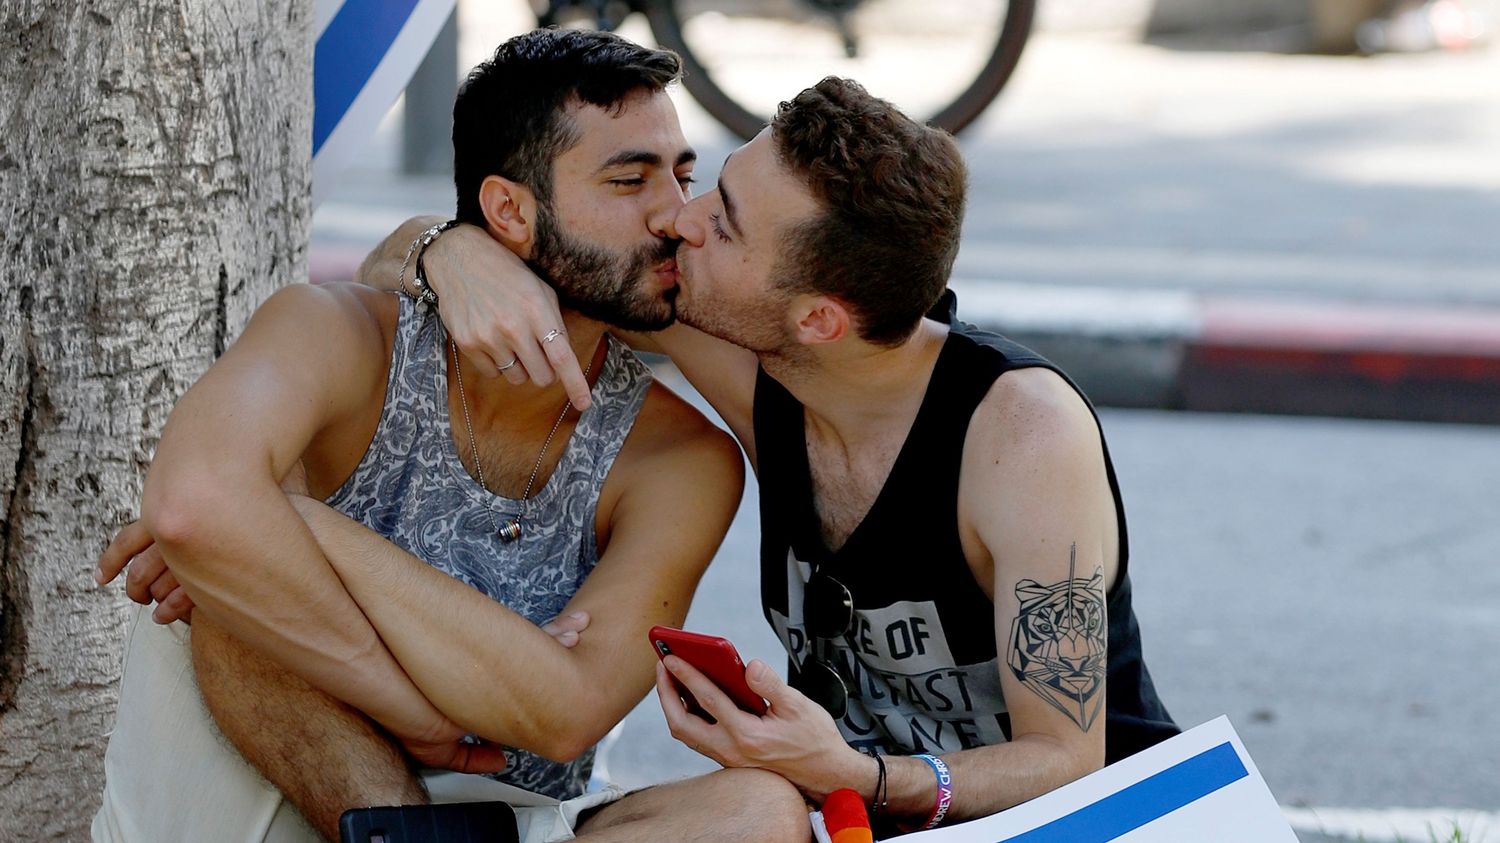 Meaws – Gay Site providing cool gay stories and articles.